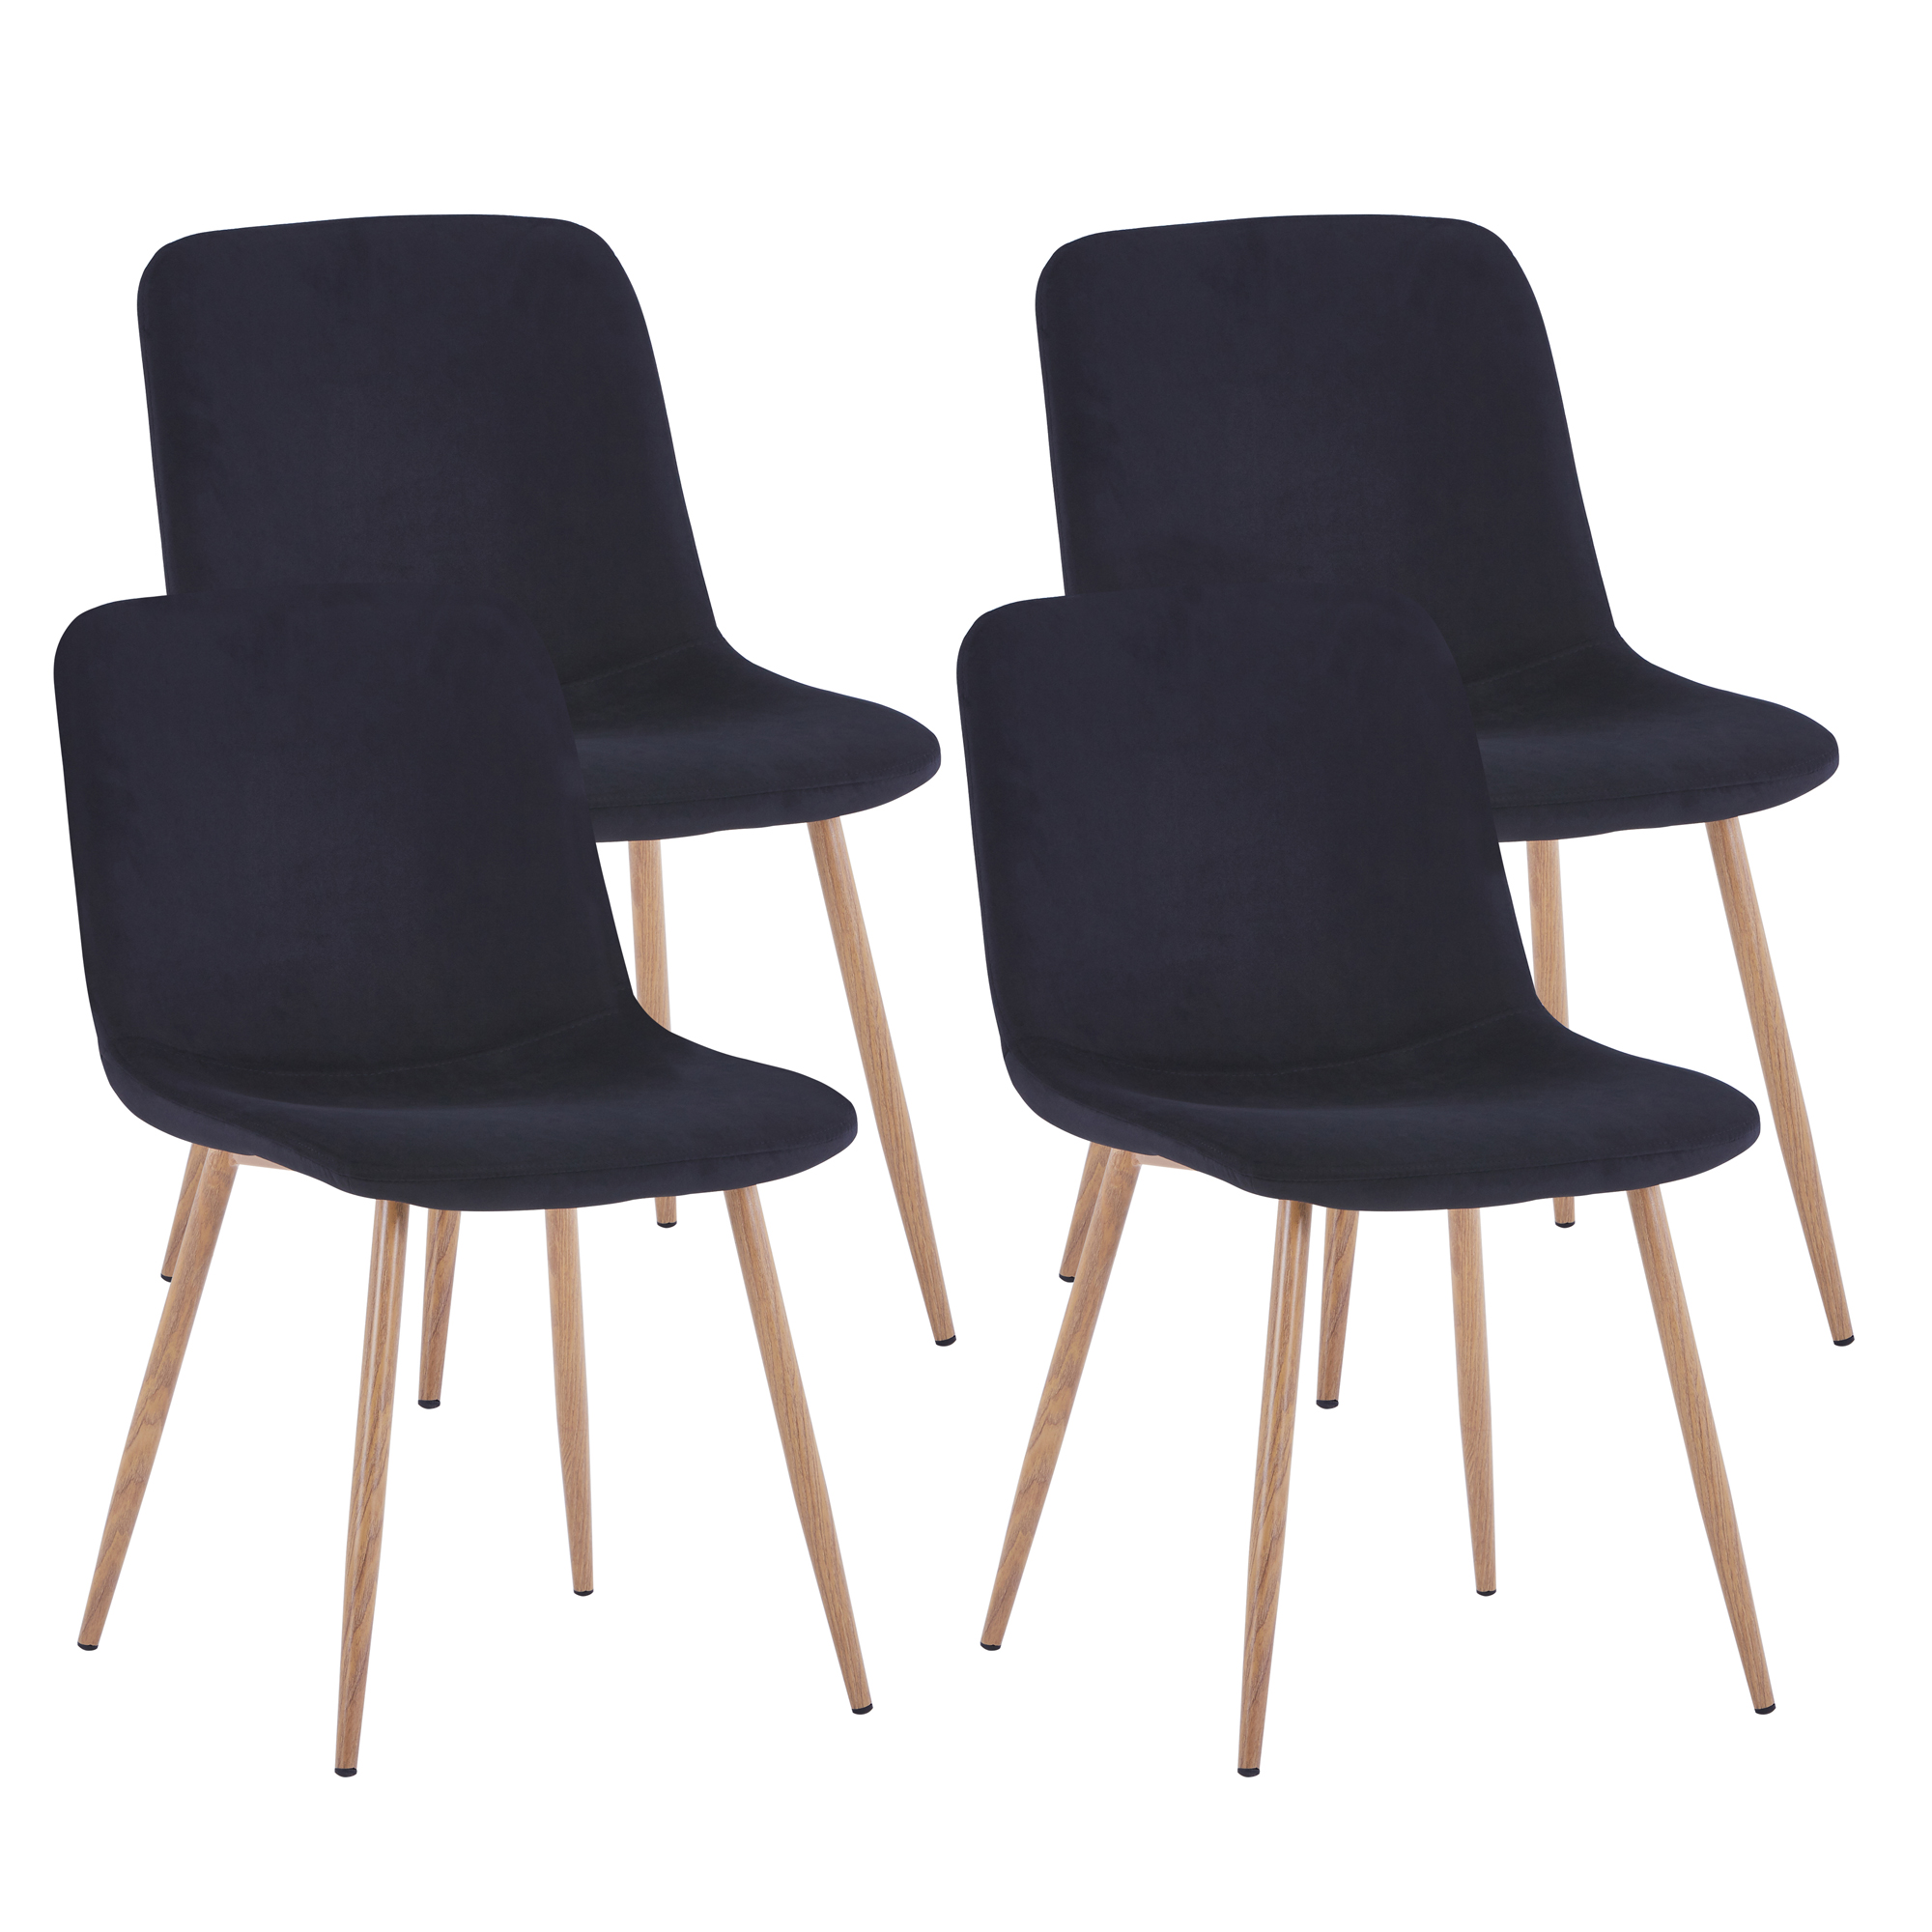 Dining Chair 4PCS（BLACK），Modern style，New technology，Suitable for restaurants, cafes, taverns, offices, living rooms, reception rooms.Simple structure, easy installation.-Boyel Living